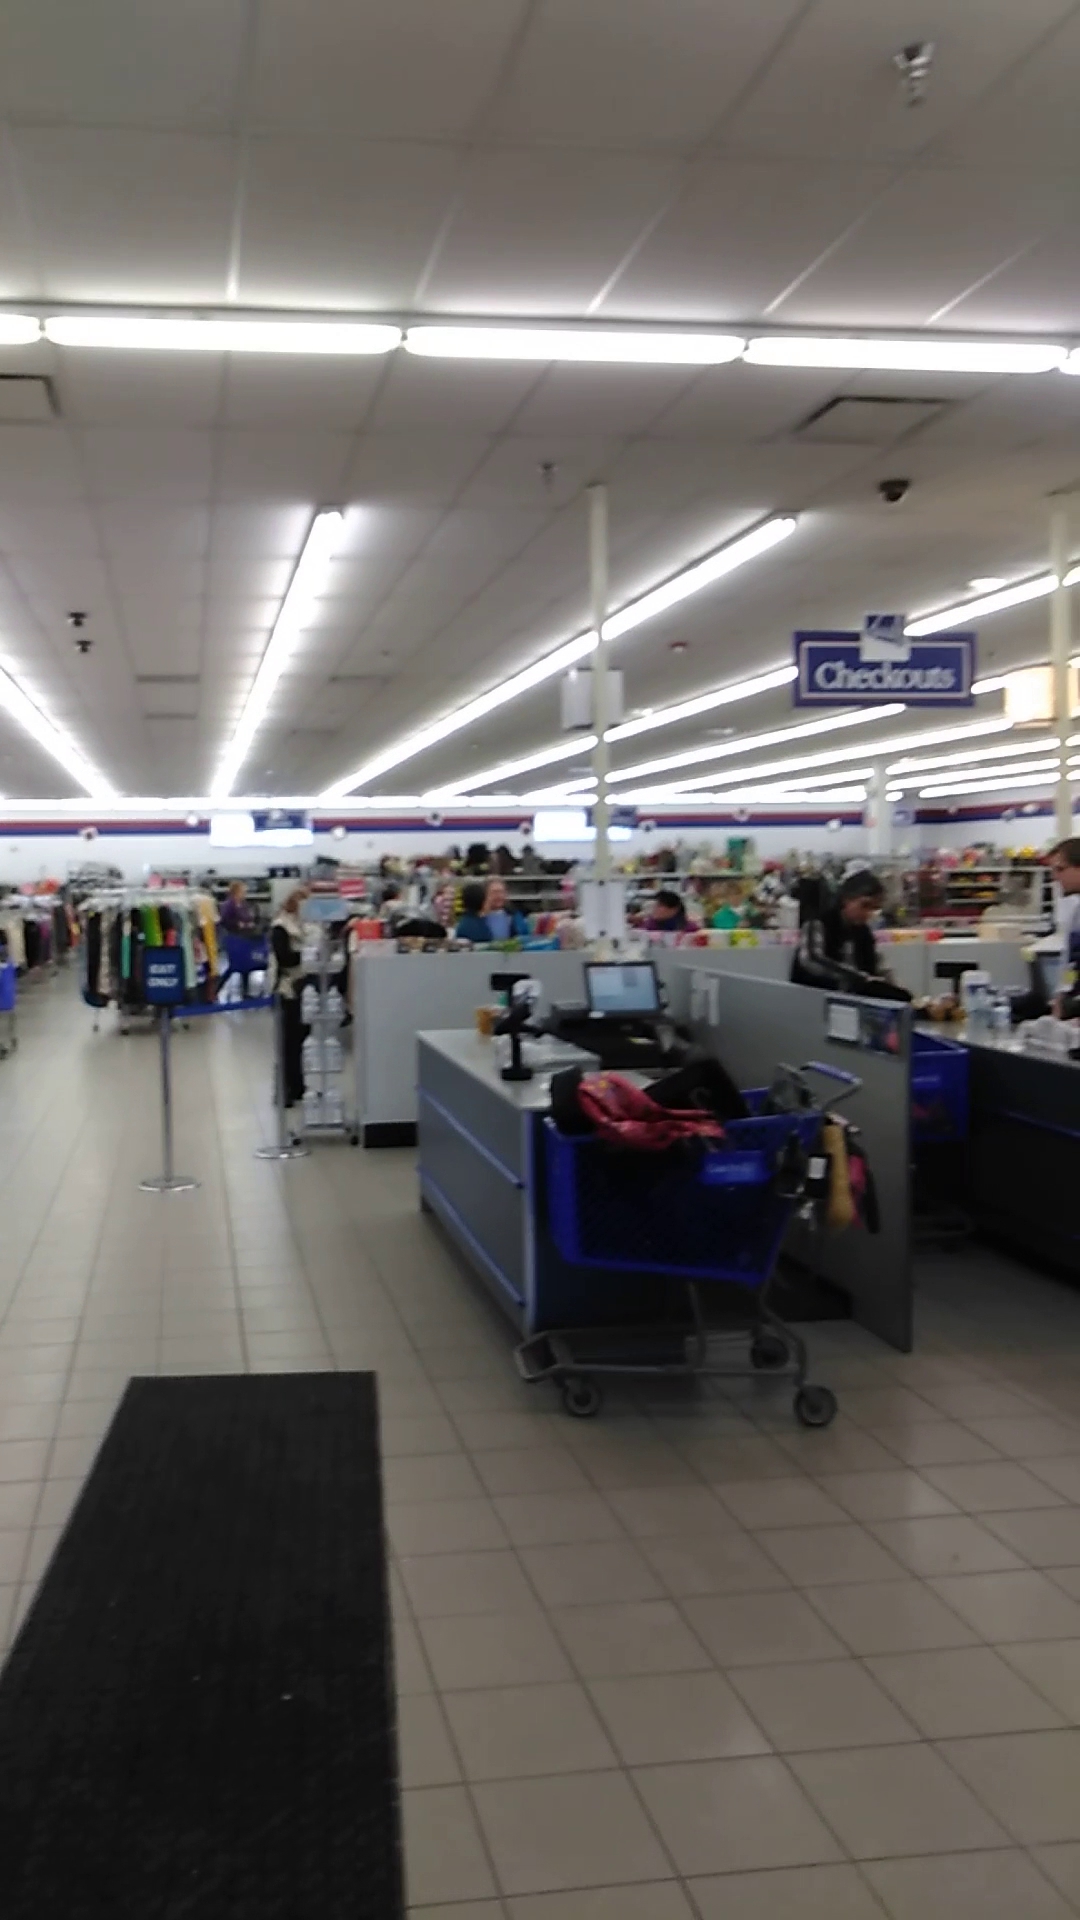 Rib Mountain Goodwill Retail Store and Training Center